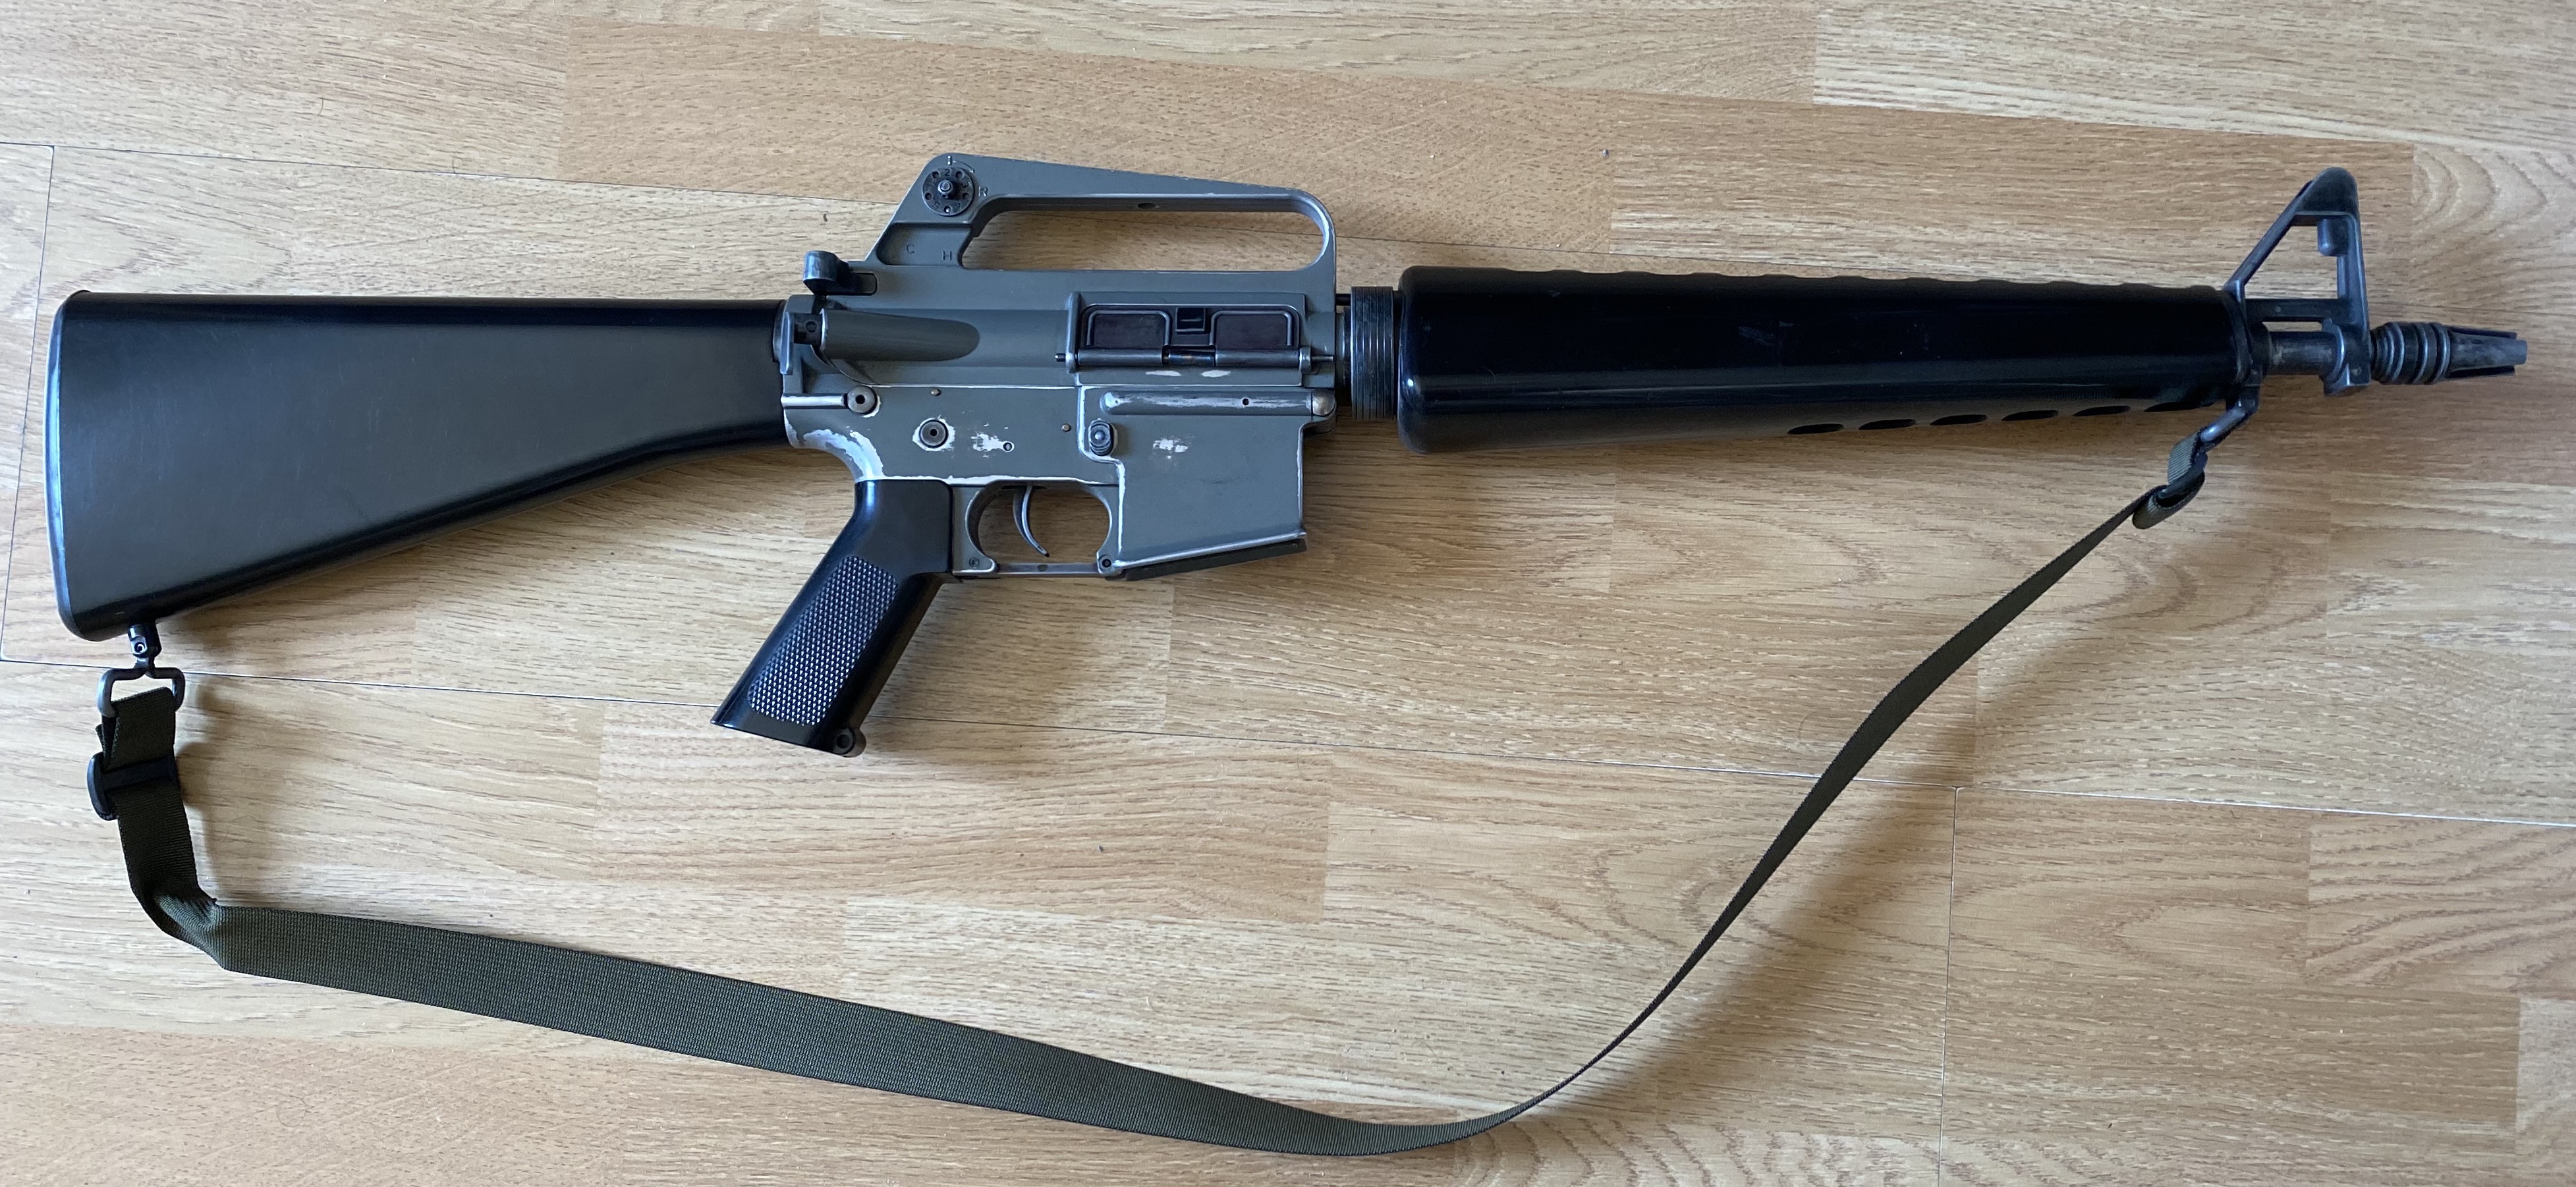 HOW TO] CYMA CM.009C M16 VN DISASSEMBLY - Internal Review 